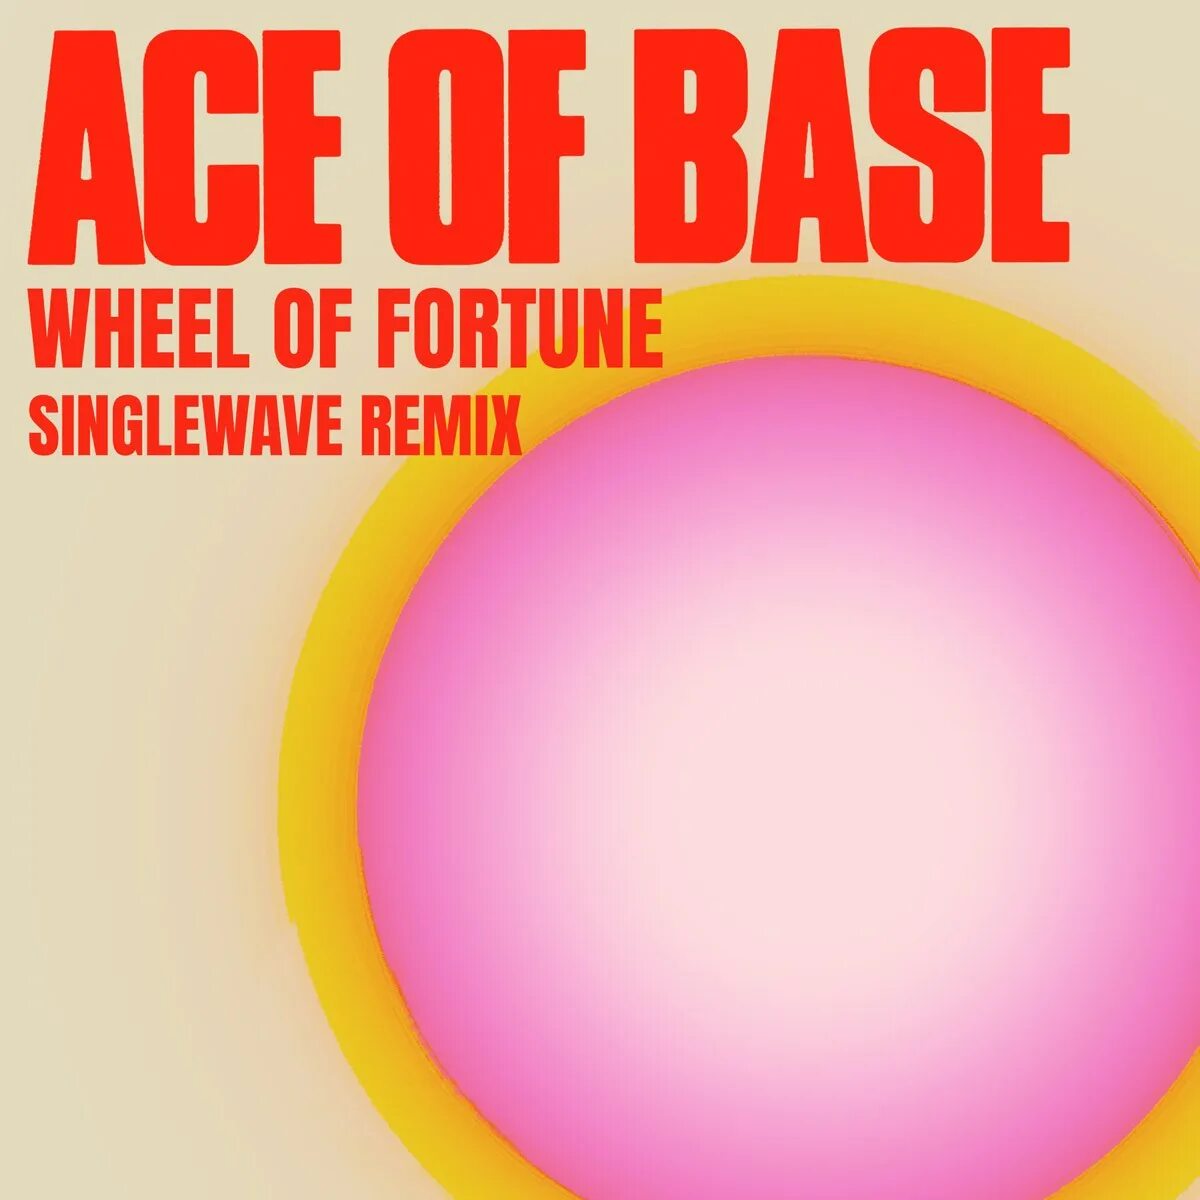 Wheel of fortune ace of base remix. Ace of Base Wheel of Fortune. Wheel of Fortune 2009 Ace of Base. Ace of Base - Wheel of Fortune (m.a.b. Remix). Ace of Base Wheel of Fortune текст.